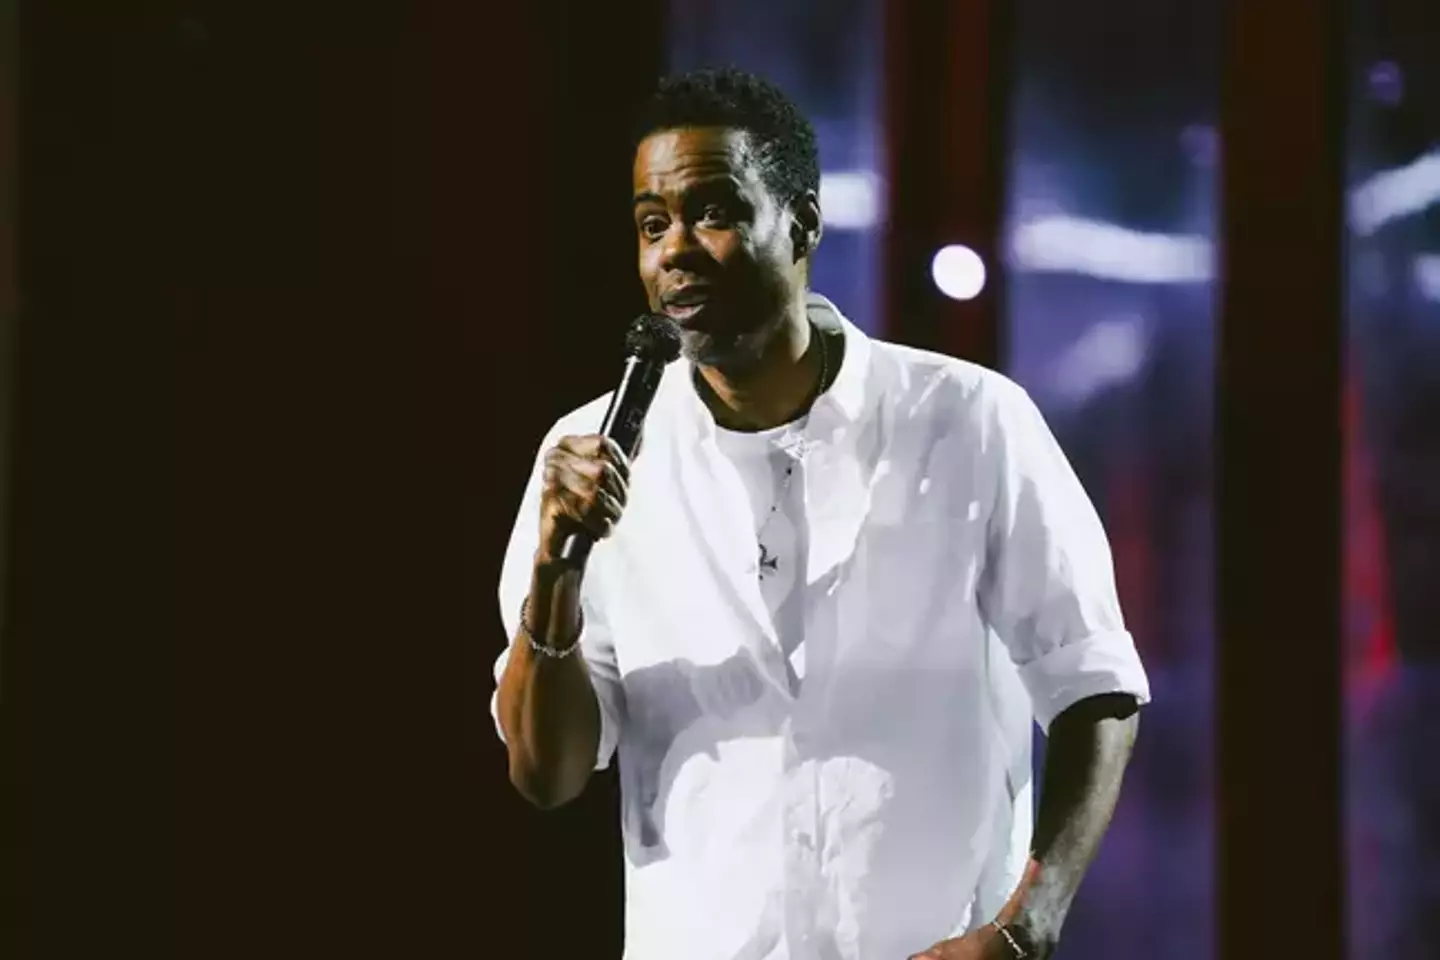 Chris Rock admitted that he got his daughter kicked out of school to teach her a lesson.